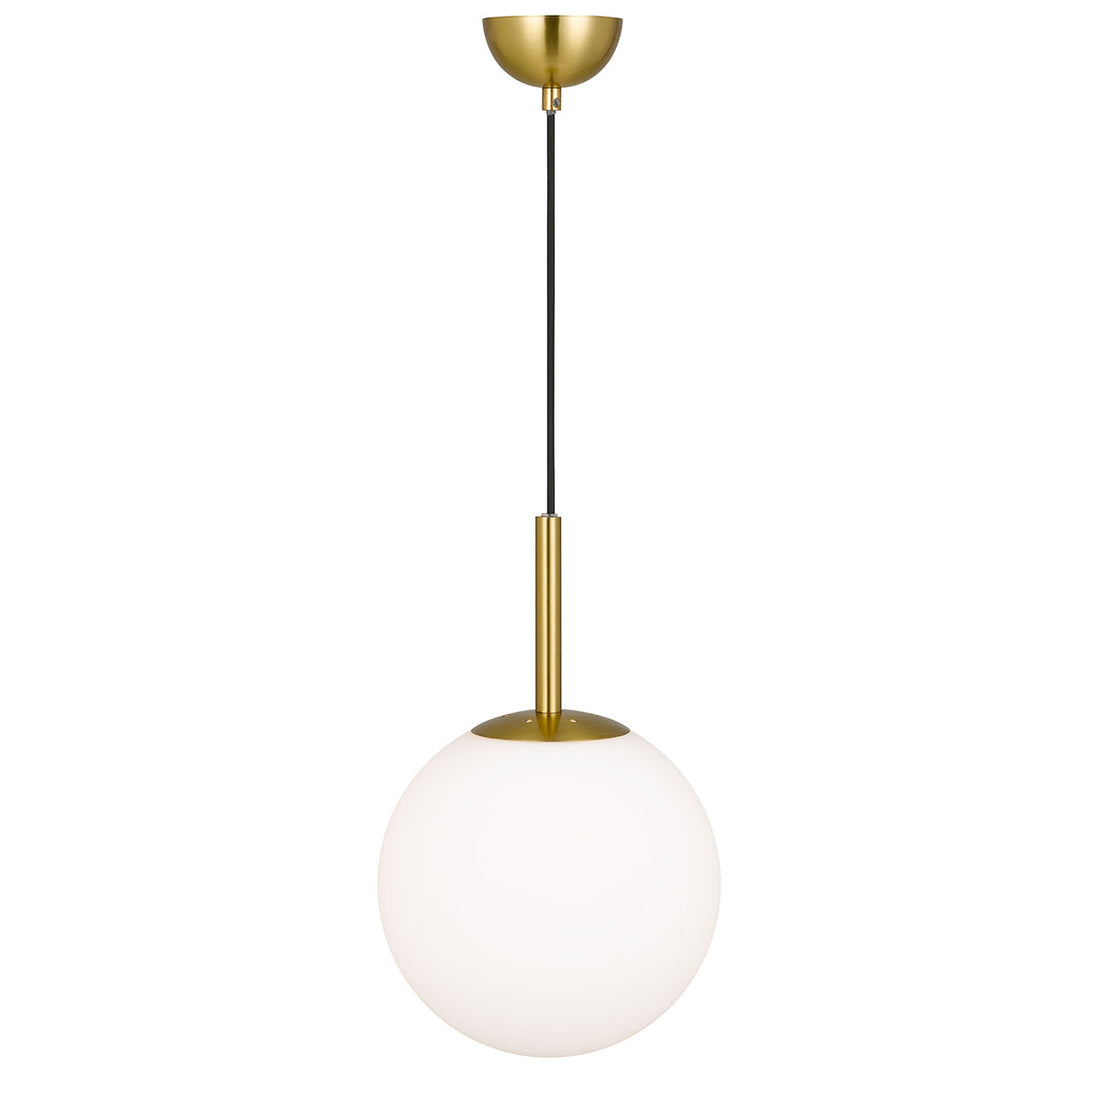 Bally 25cm Antique Gold with Opal Glass Modern Pendant